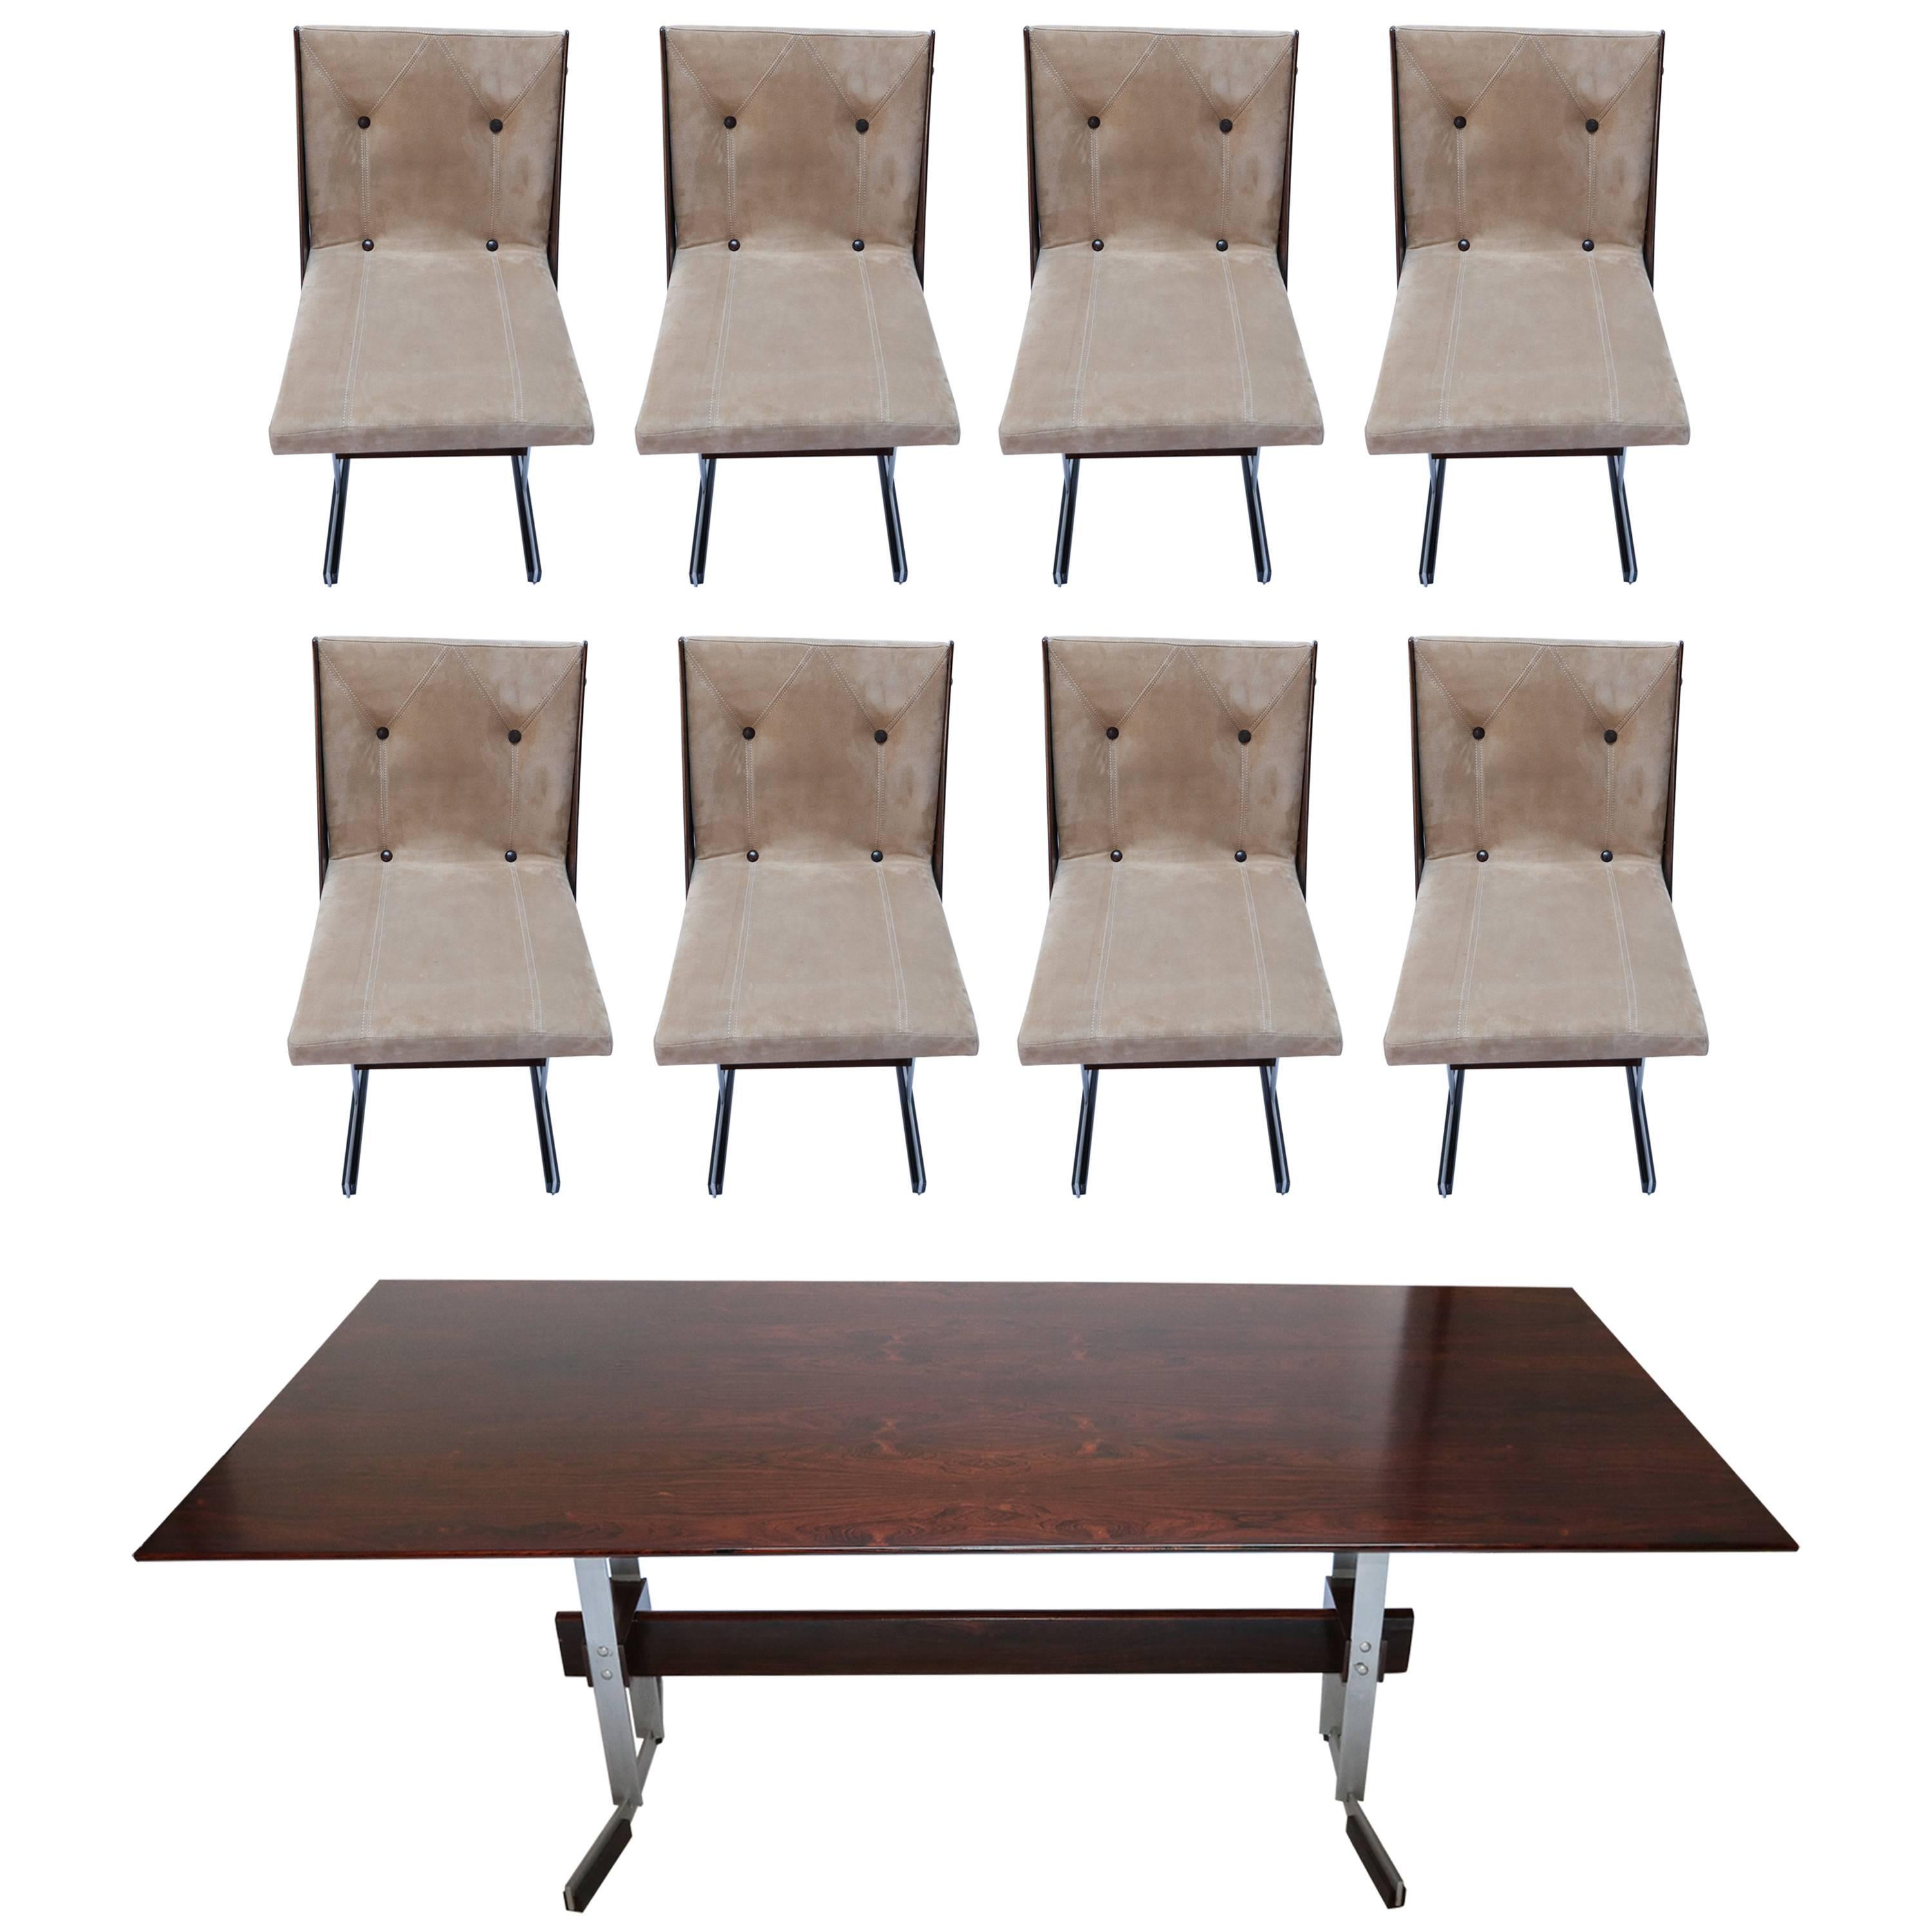 Brazilian jacaranda wood and metal dining table and eight chairs from the 1960s attributed to Jorge Zalszupin, upholstered in beige suede. 

Chair dimensions: 18